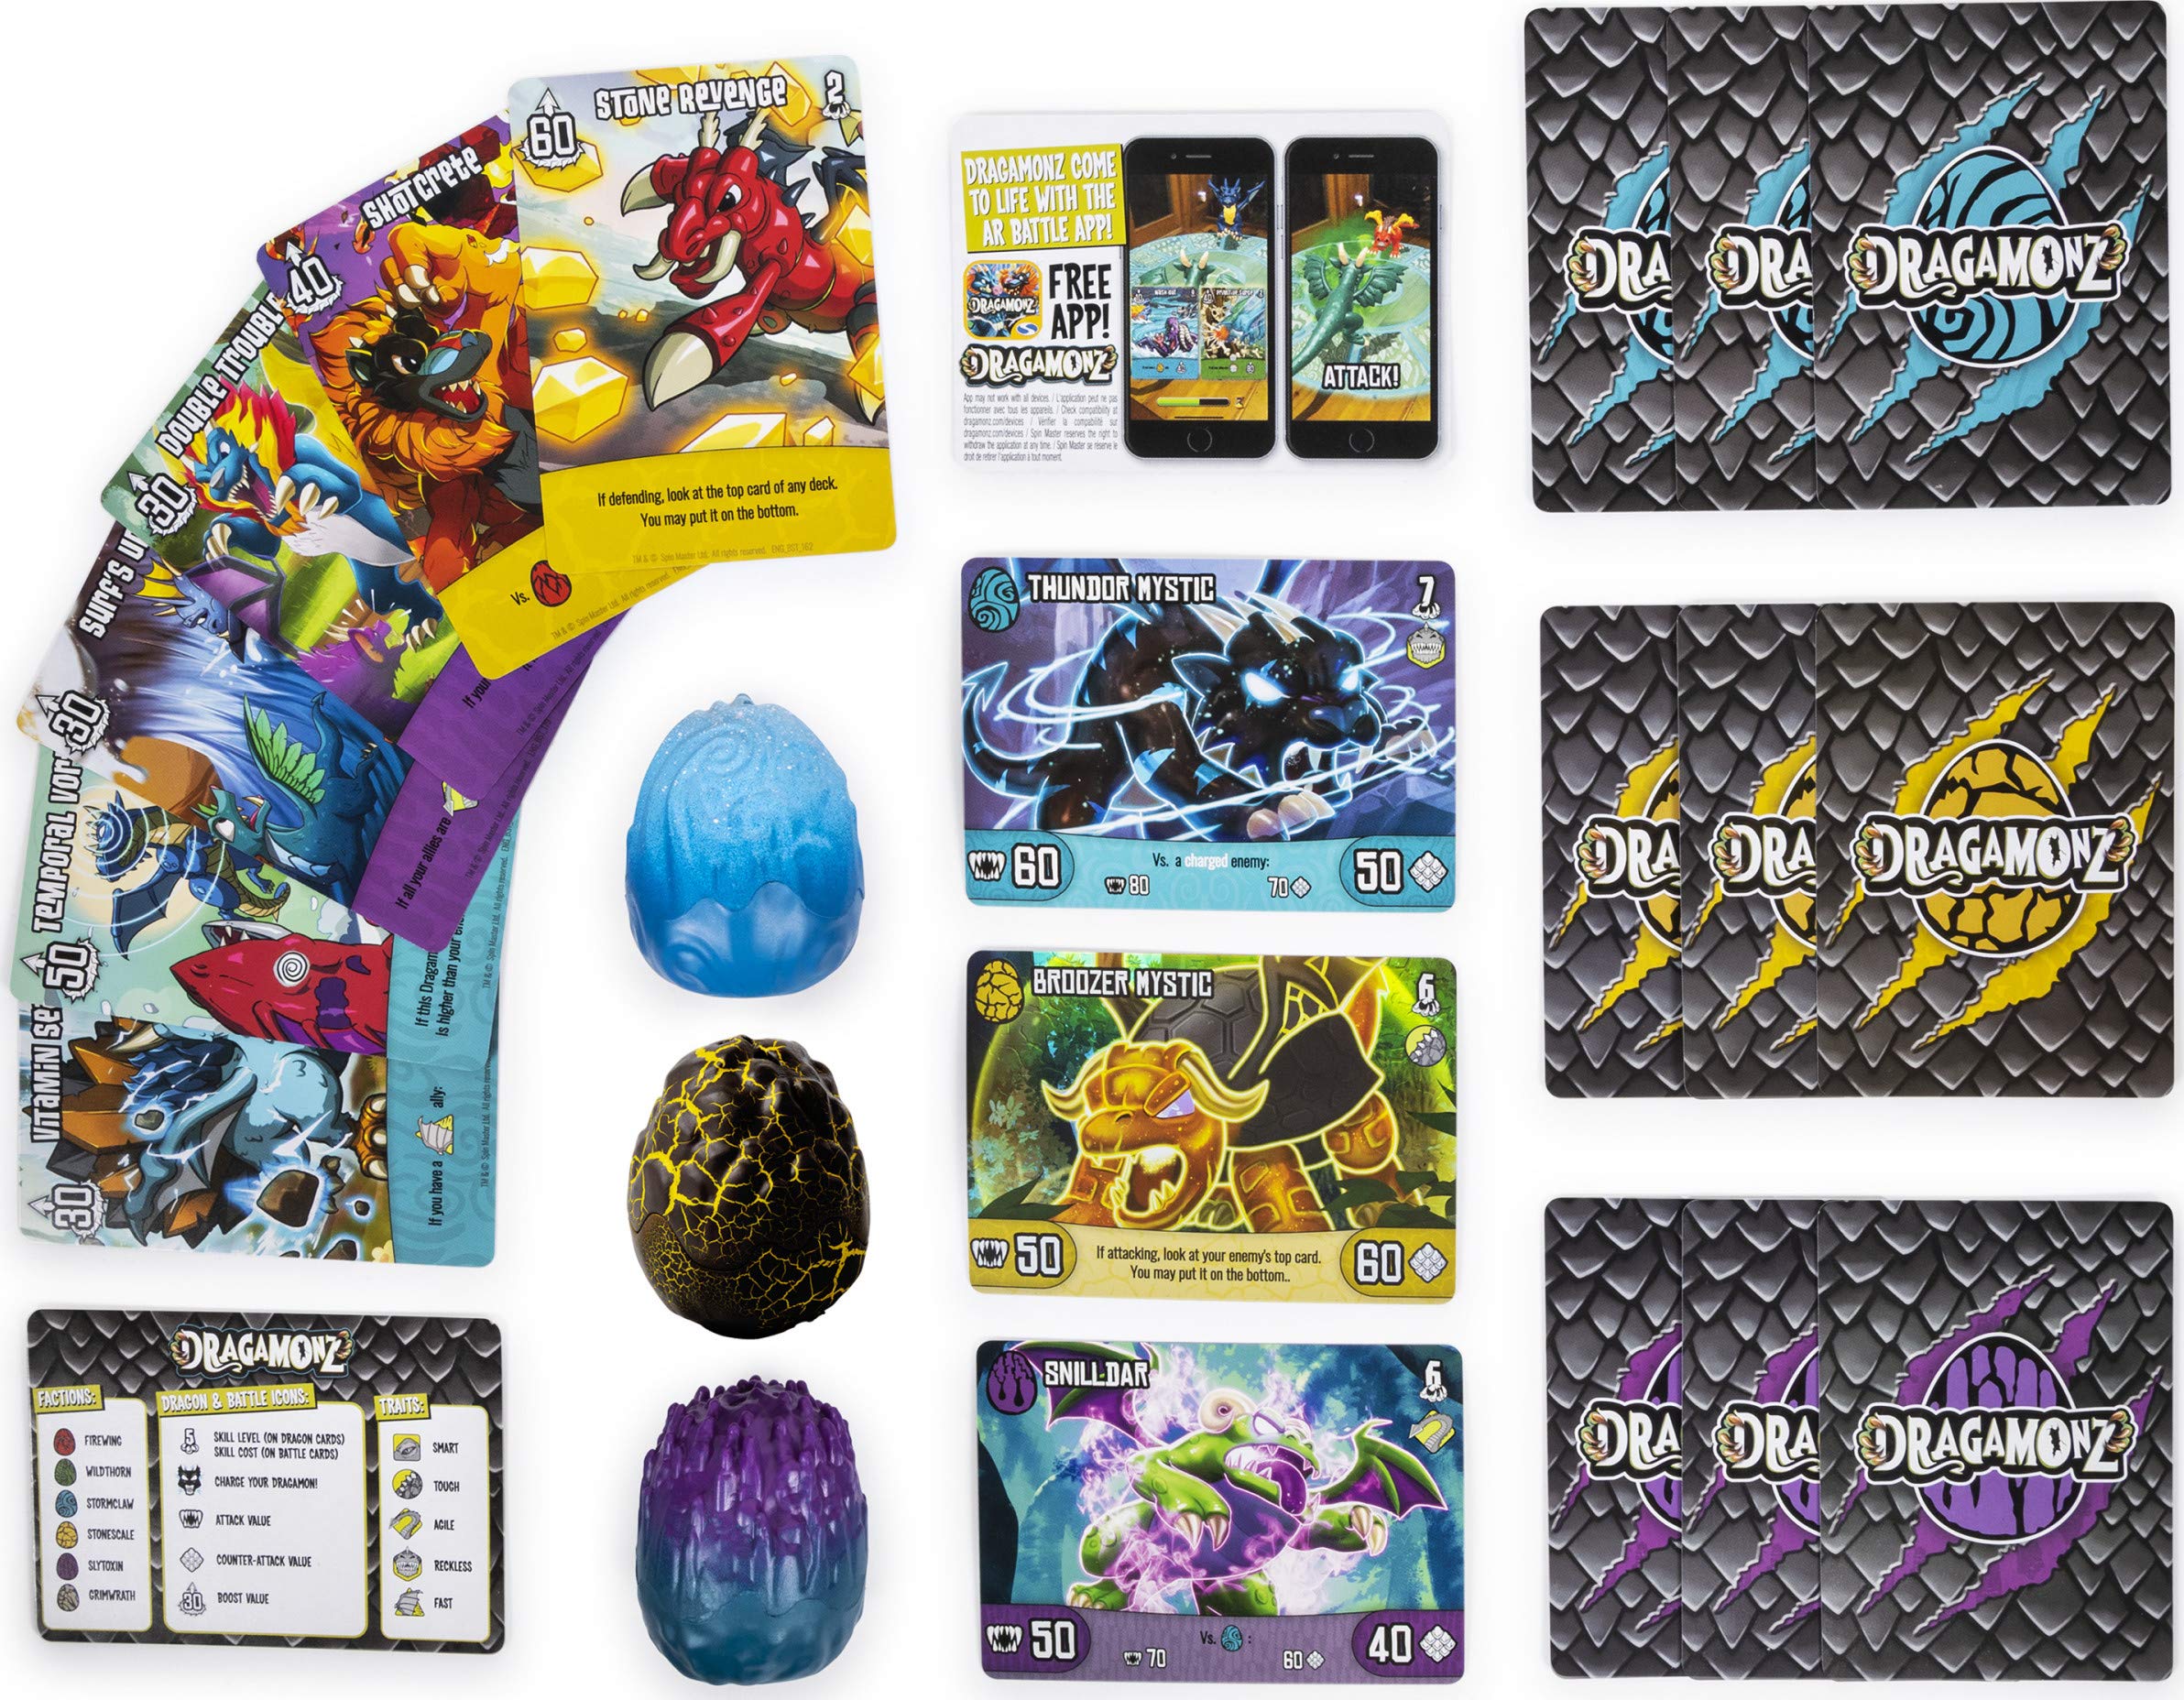 Dragamonz, Dragon Multi 3-Pack, Collectible Figure and Trading Card Game, for Kids Aged 5 and Up